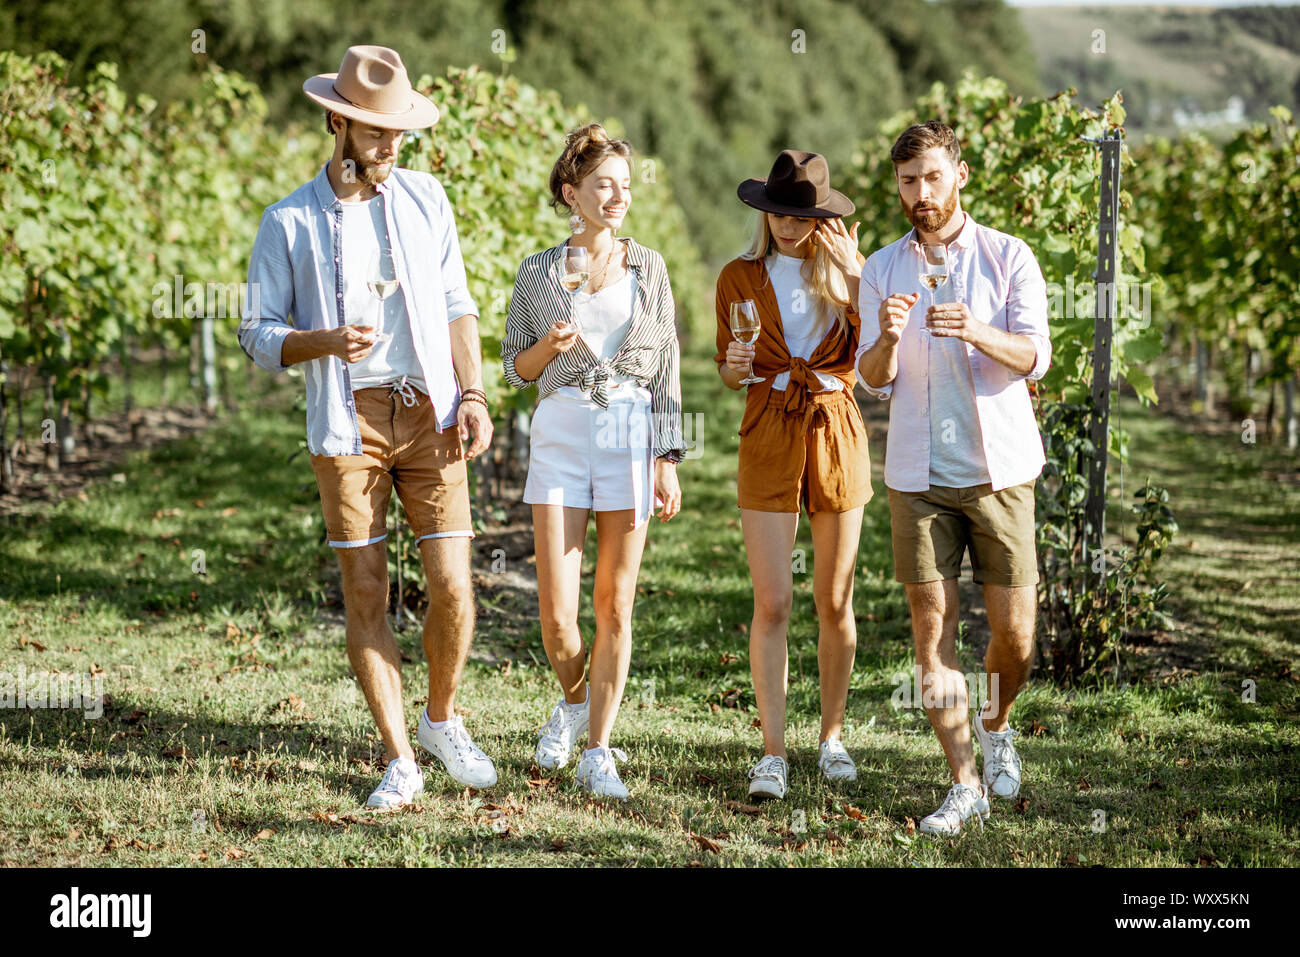 Group of young friends dressed casually having fun together, walking with wine glasses on the vineyard on a sunny summer morning Stock Photo